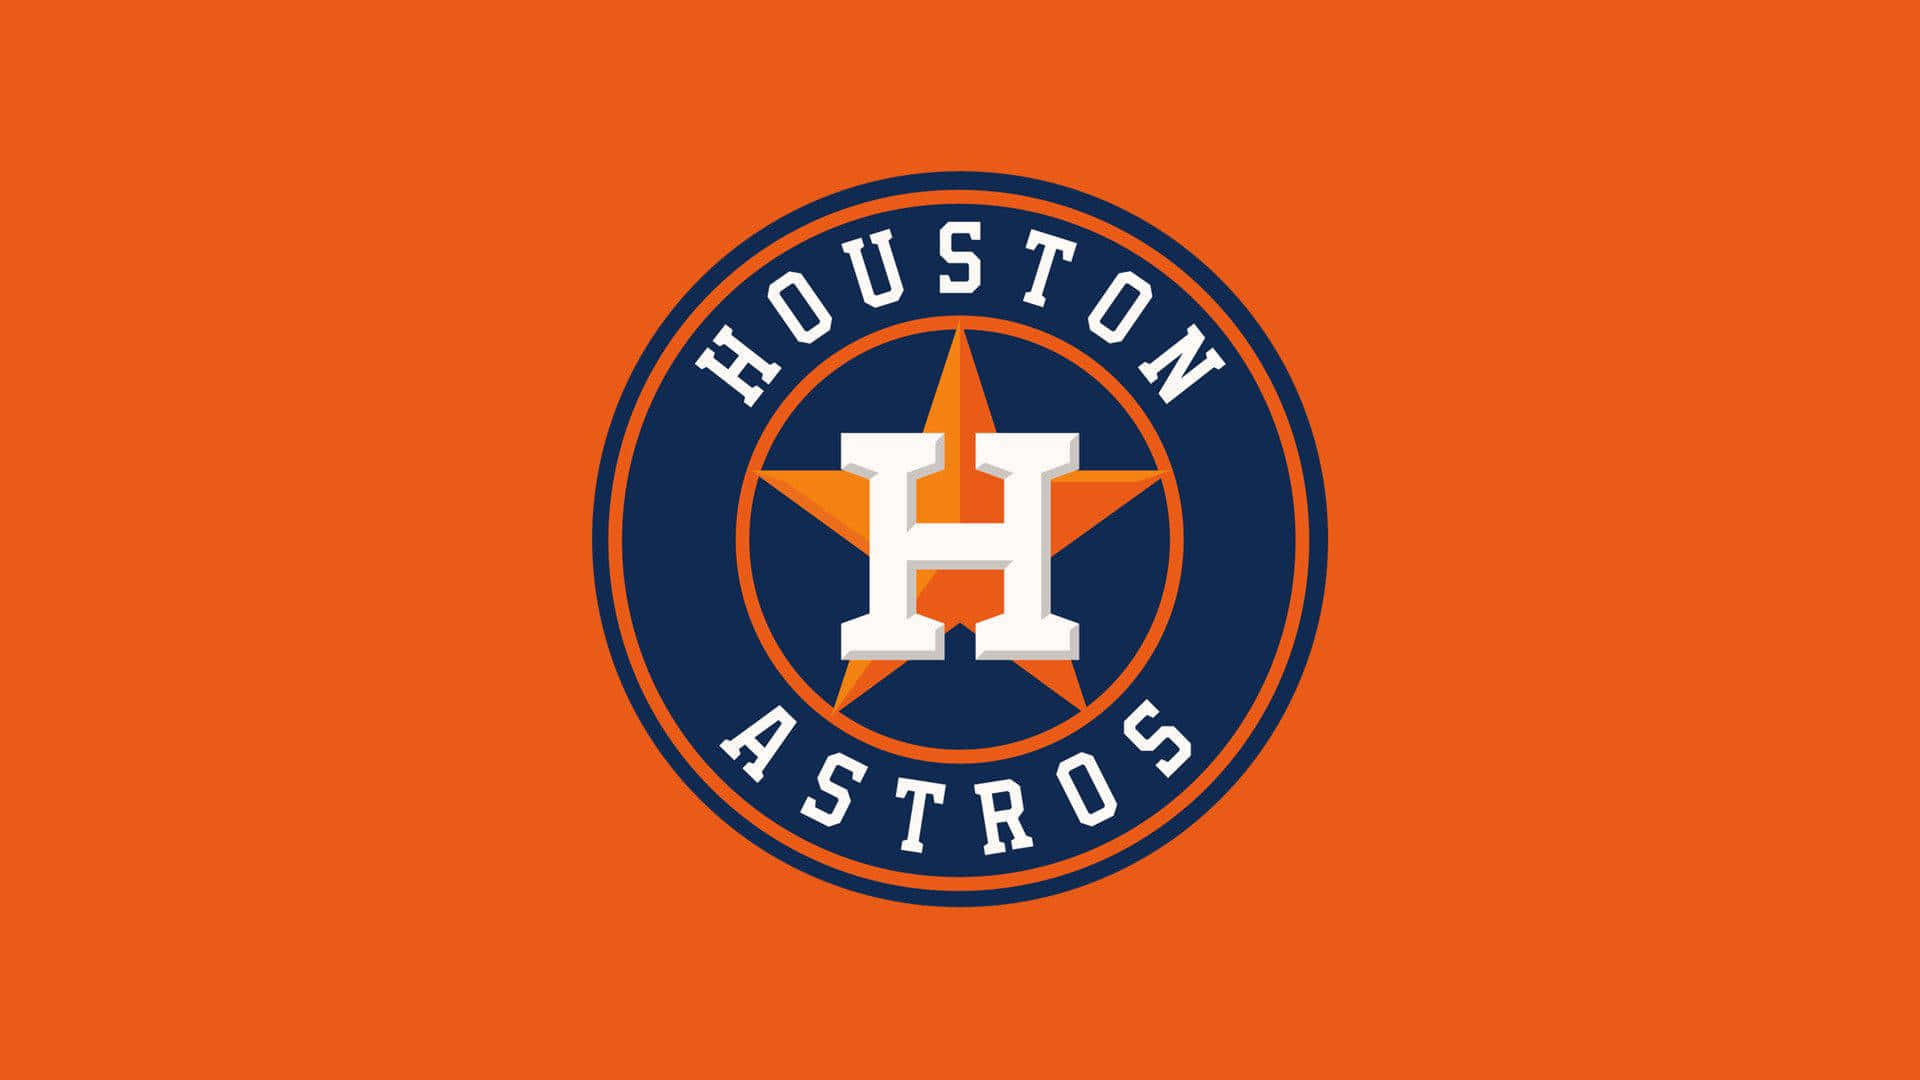 200+] Astros Backgrounds